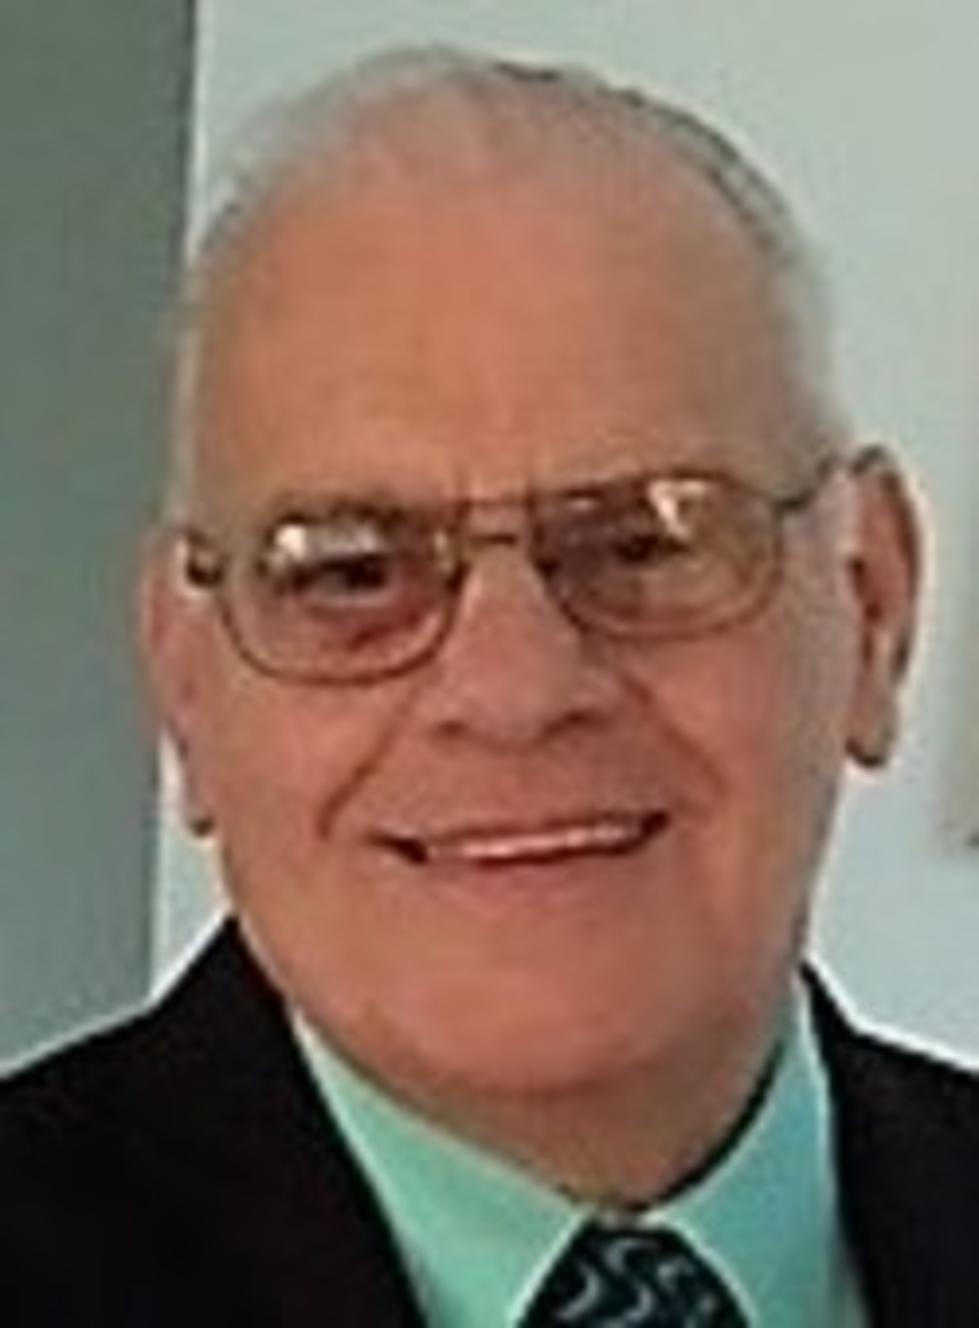 William J Smith Sr. “Bill”, a New Windsor Resident, Dies at 70